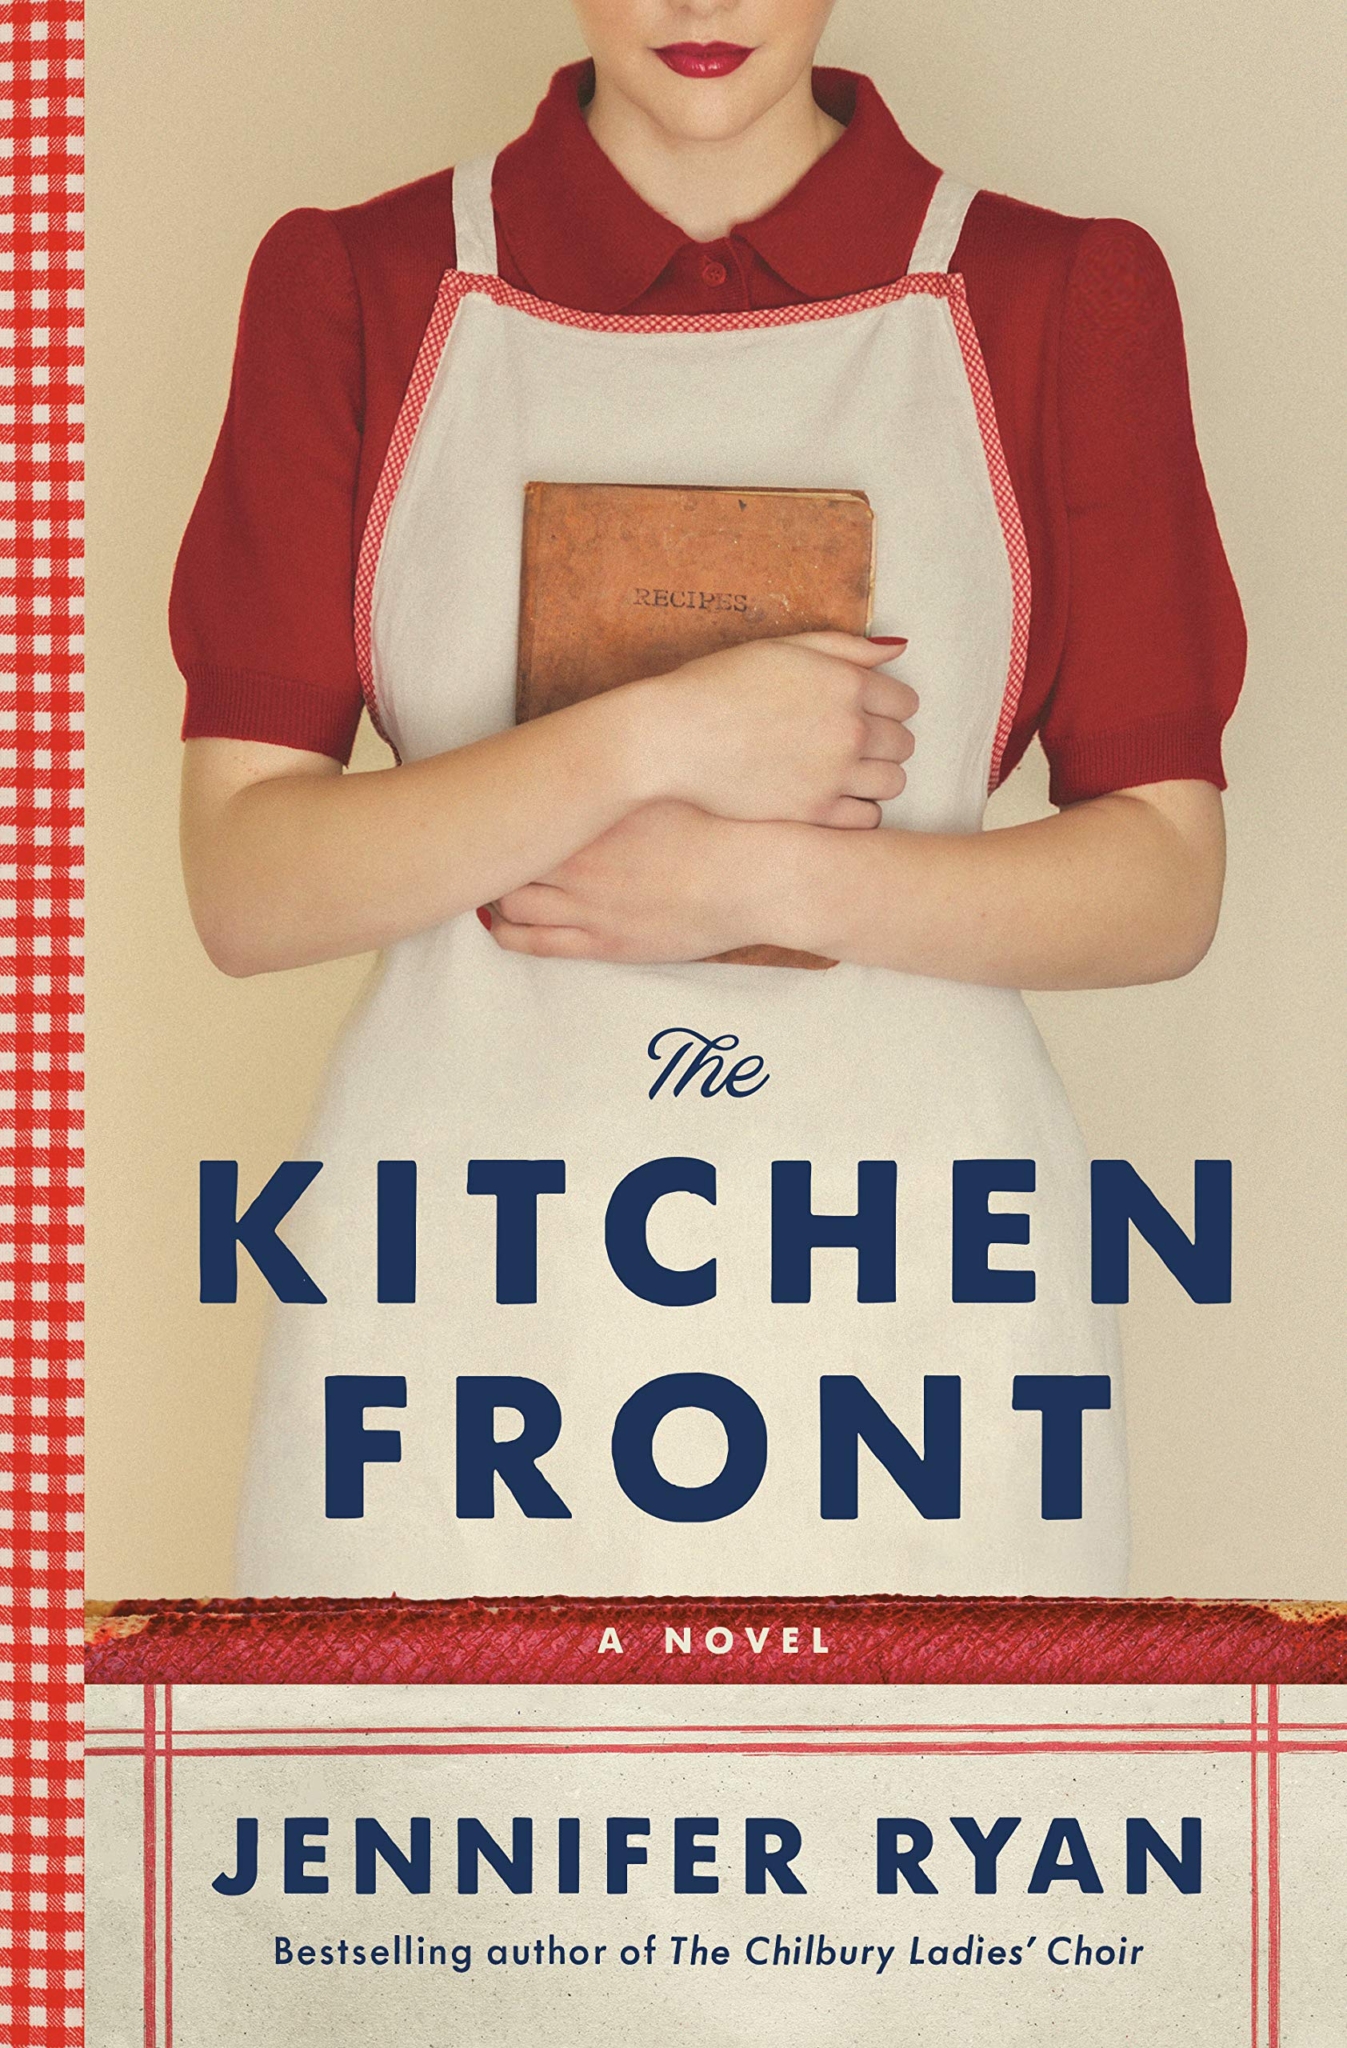 kitchenfrontlarge Birmingham-Southern's summer book clubs start July 26—sign up now